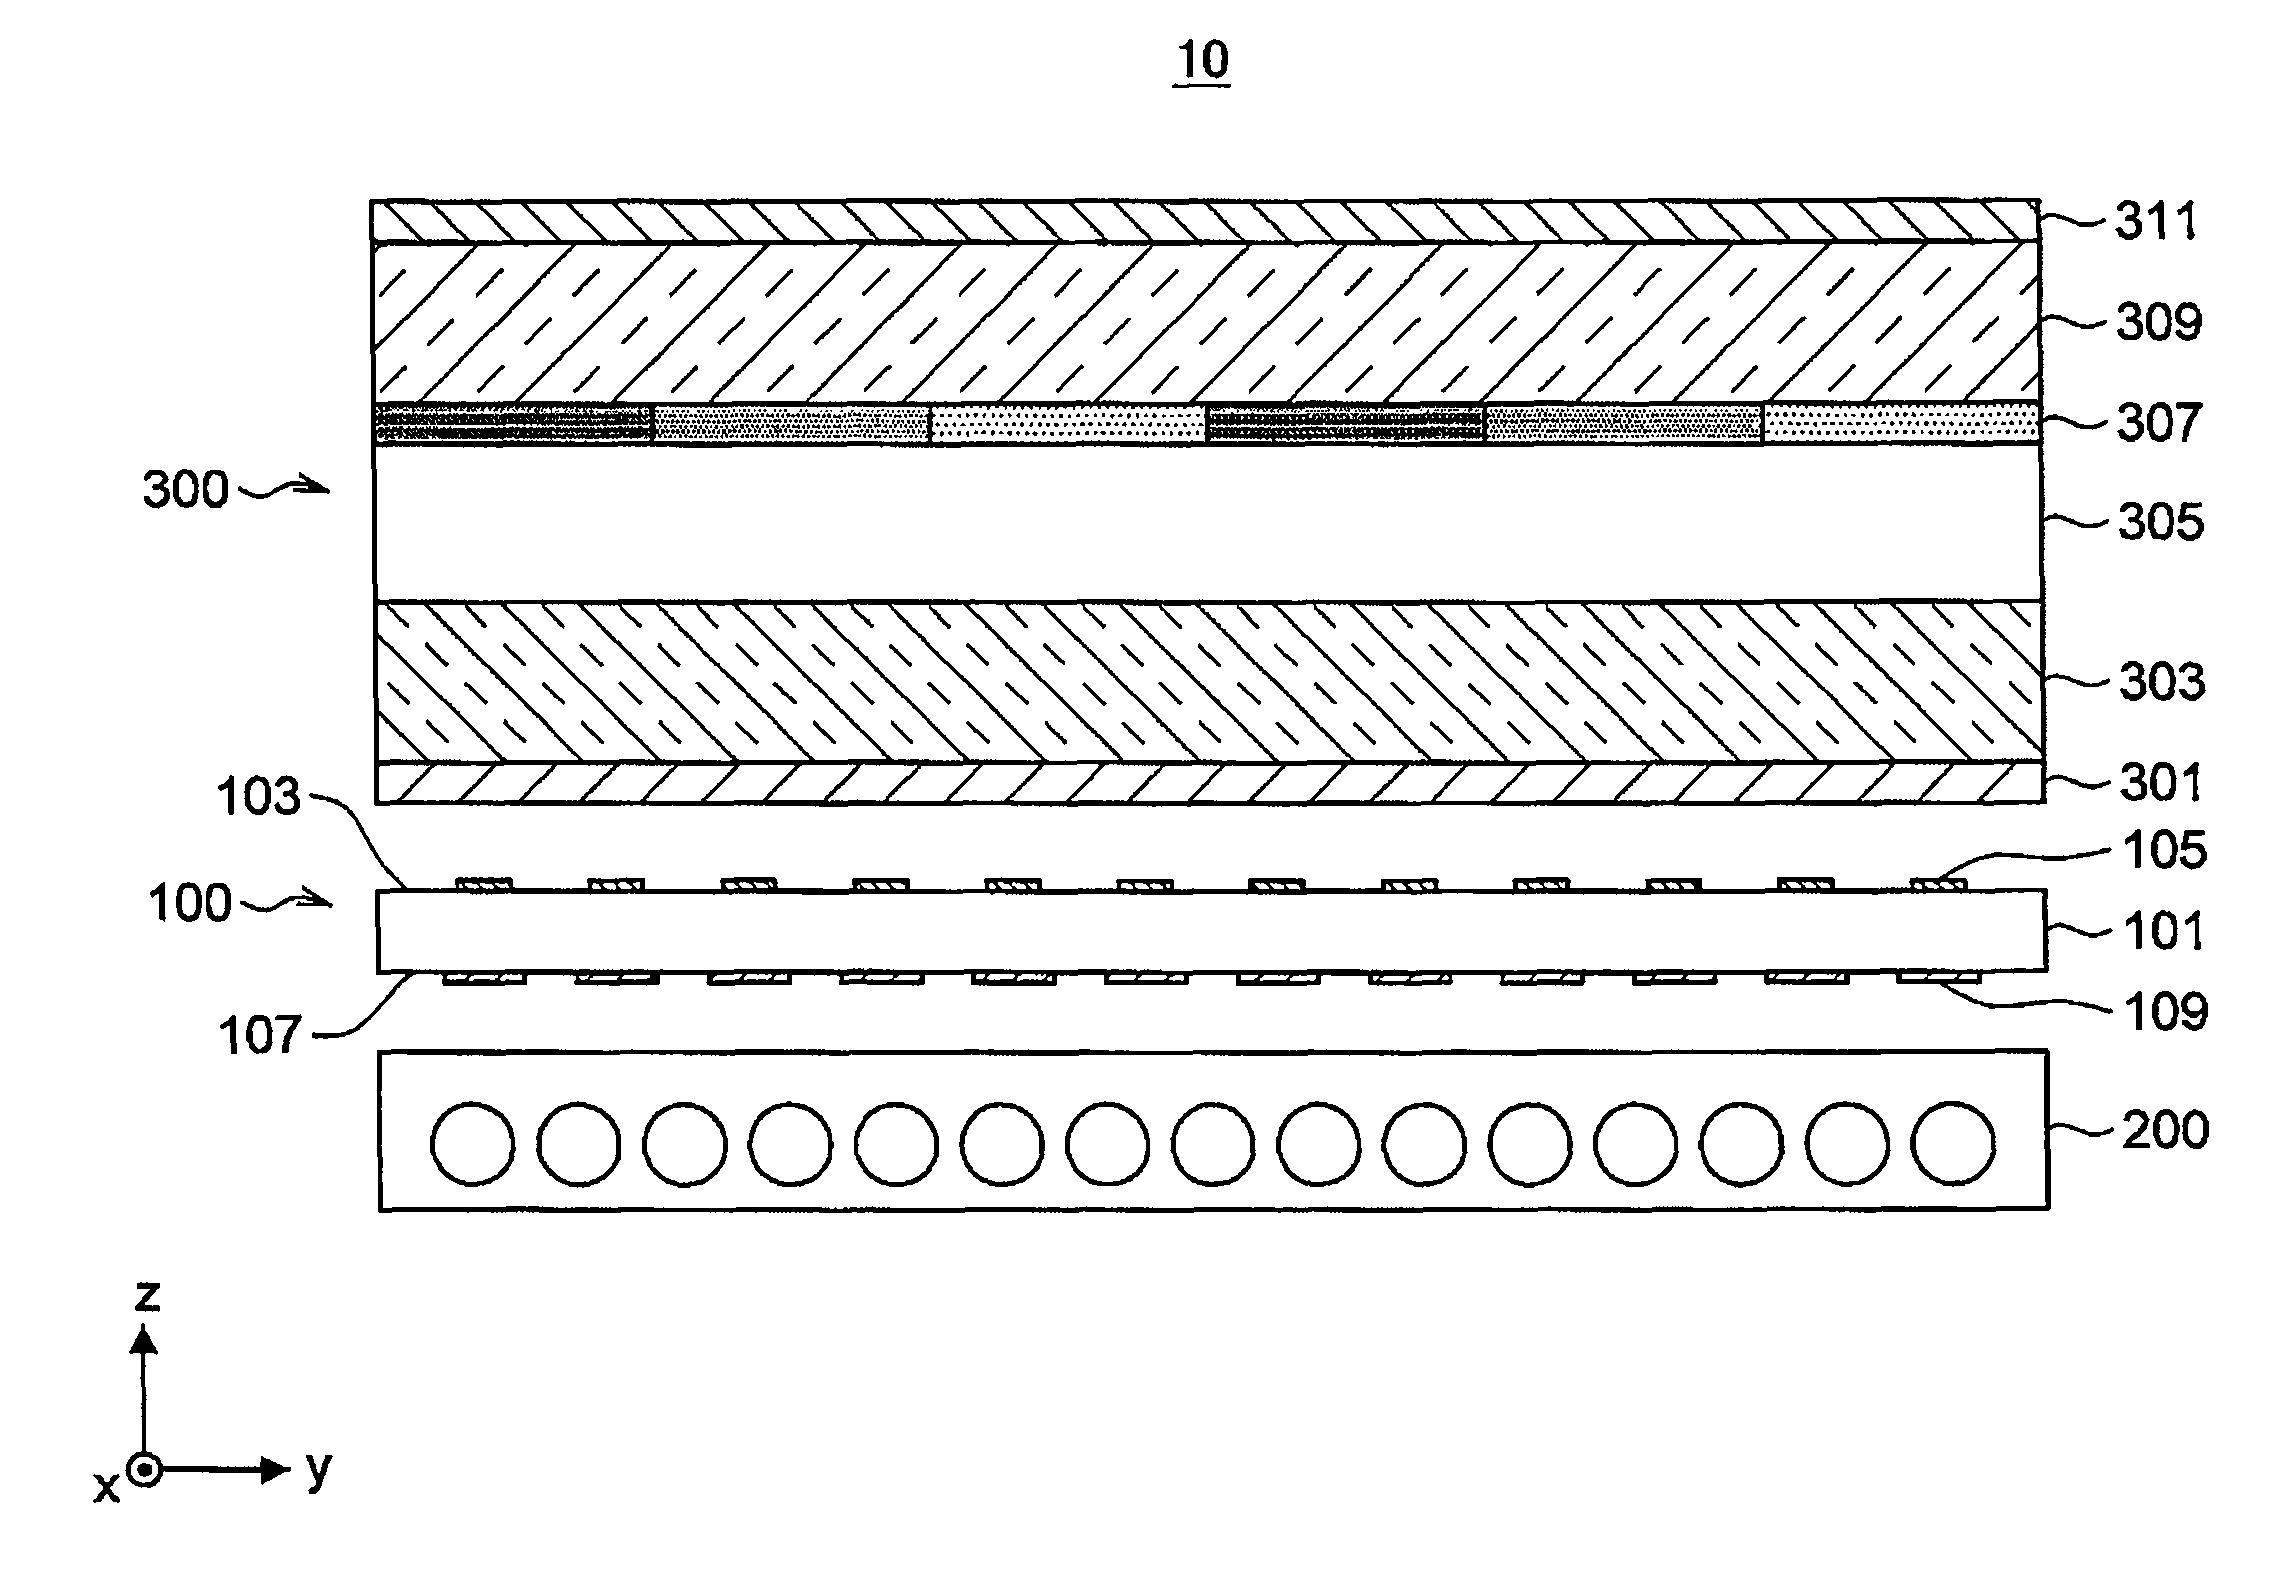 Liquid crystal display device, backlight source and optical film